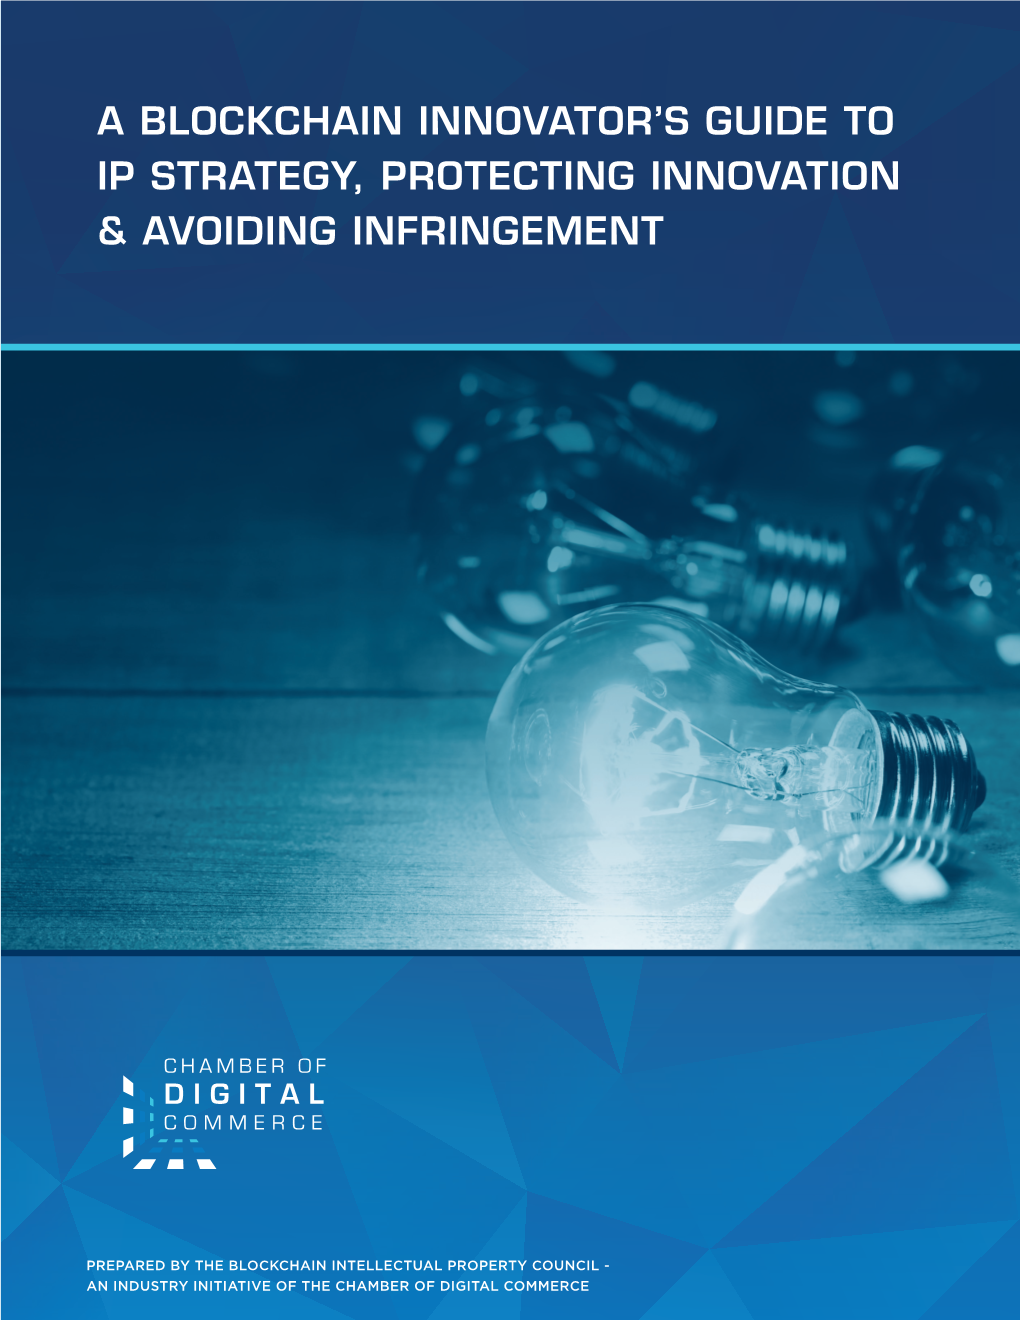 A Blockchain Innovator's Guide to IP Strategy, Protecting Inoovation and Avoiding Infringement